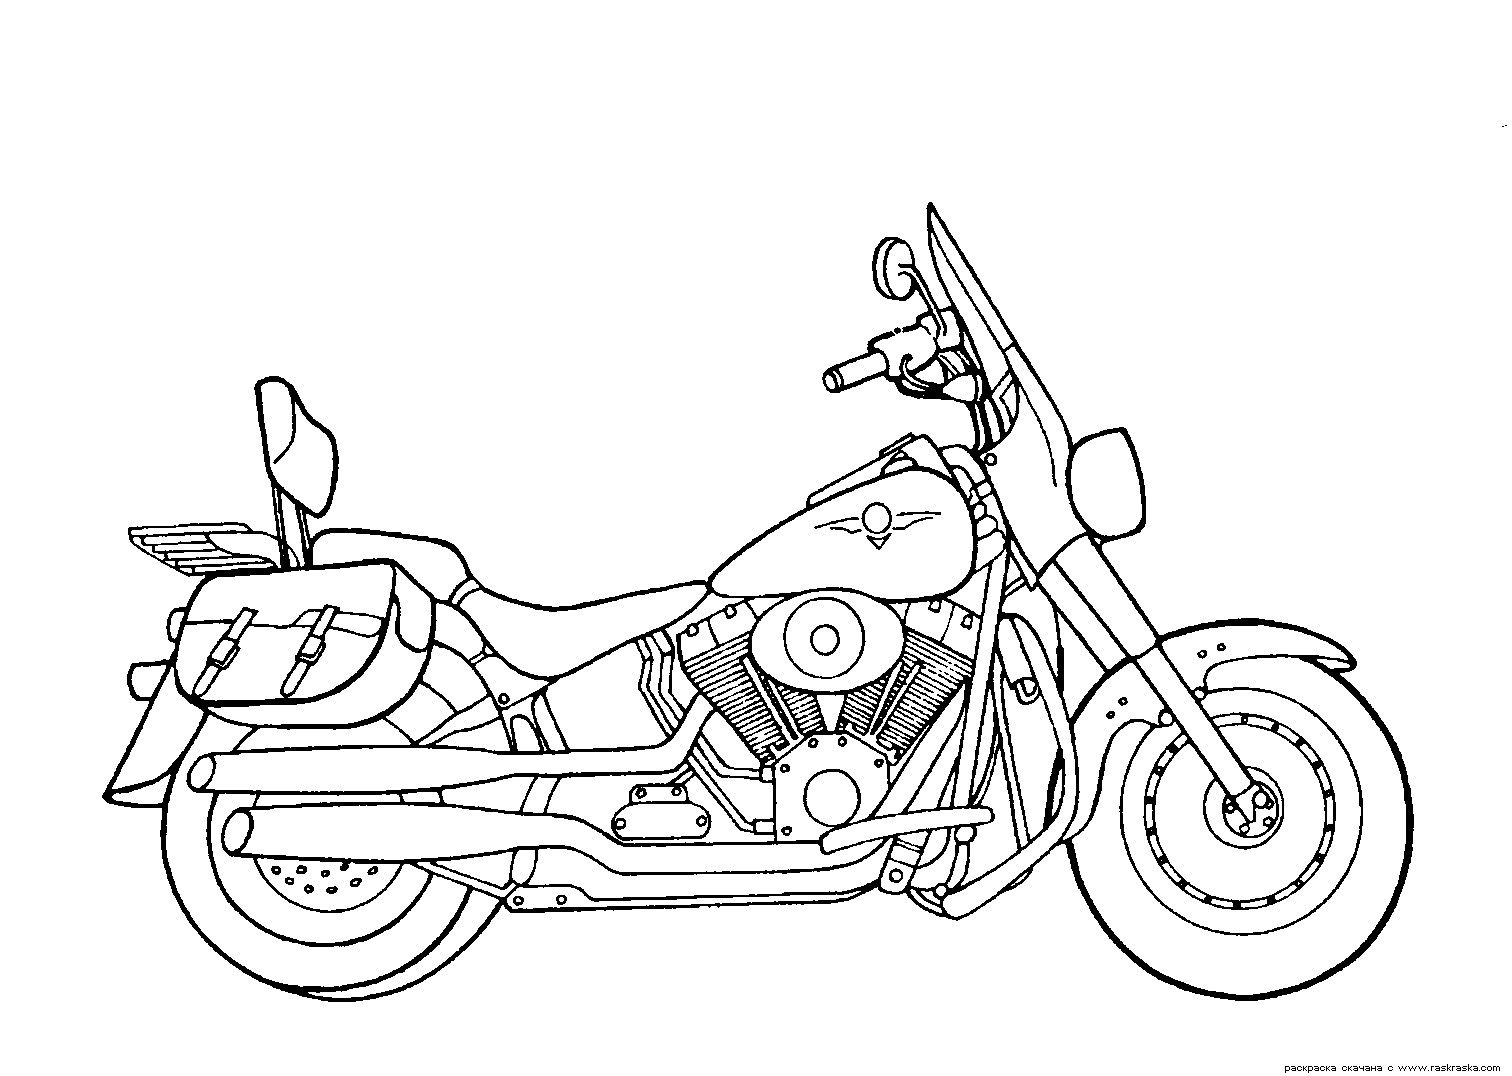 Motorcycle Coloring Pages For Kids
 Free Printable Motorcycle Coloring Pages For Kids